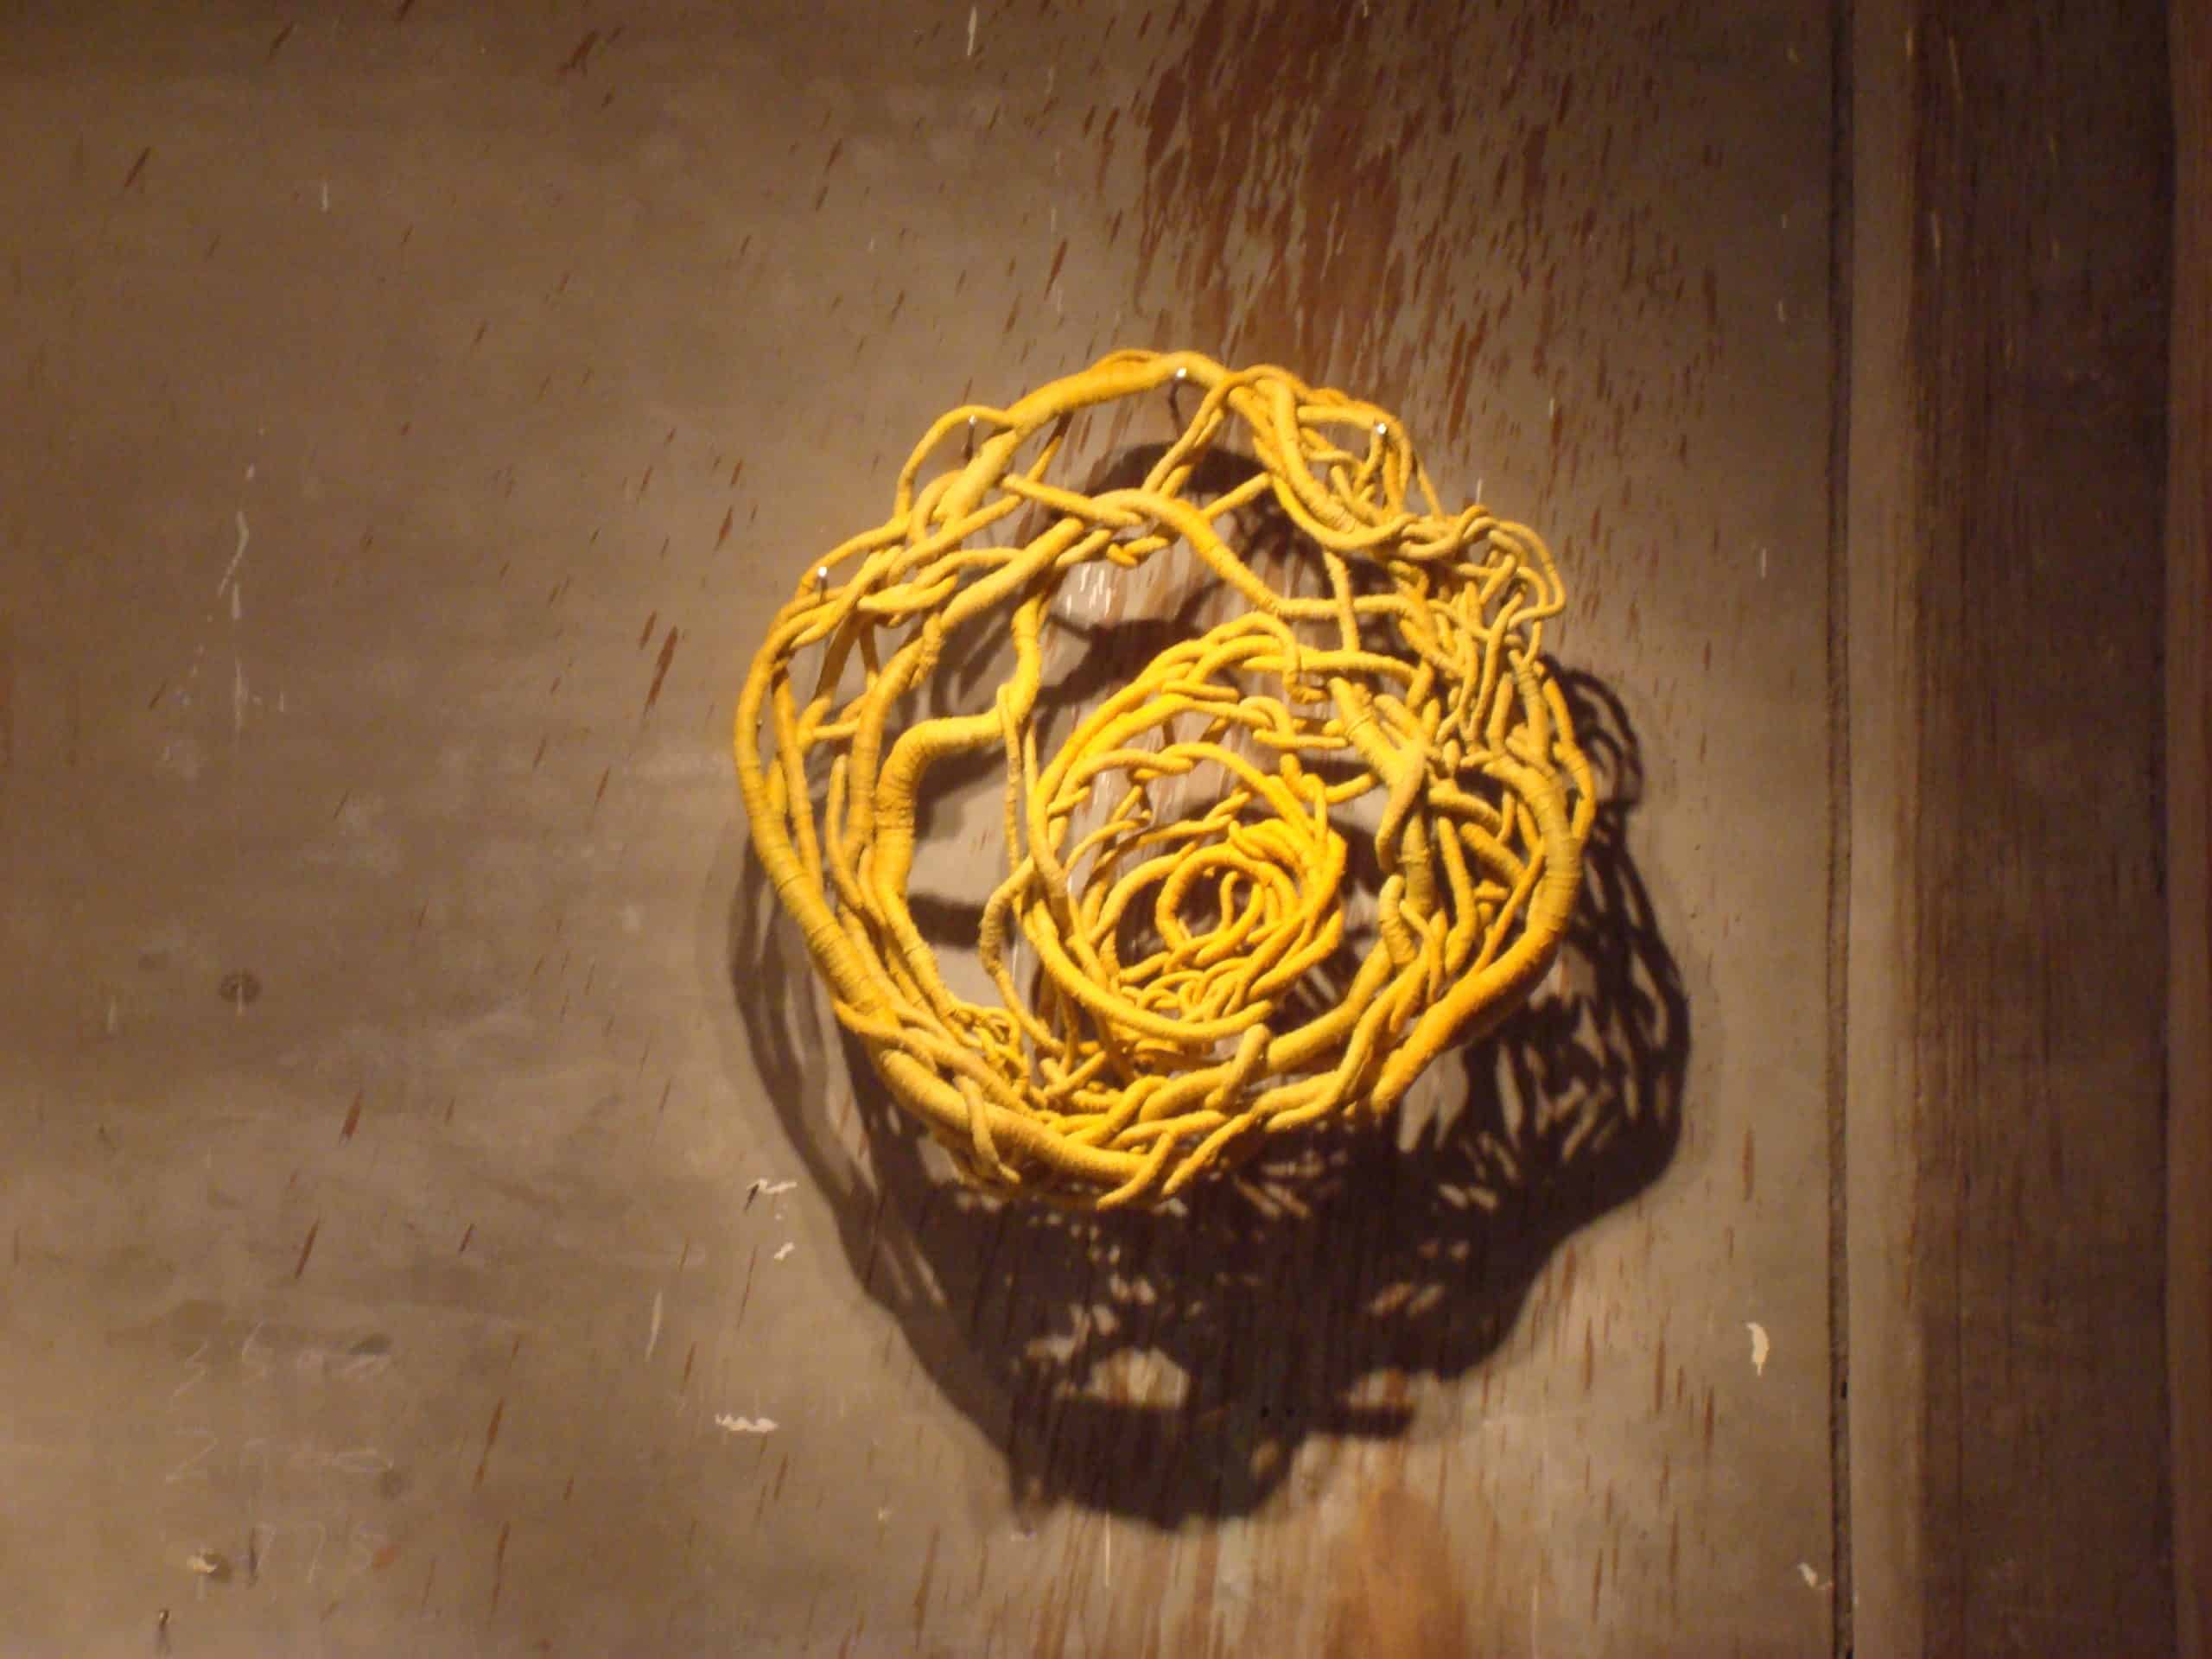 A yellow sculpture by Aude Franjou at the Cheongju craft biennale